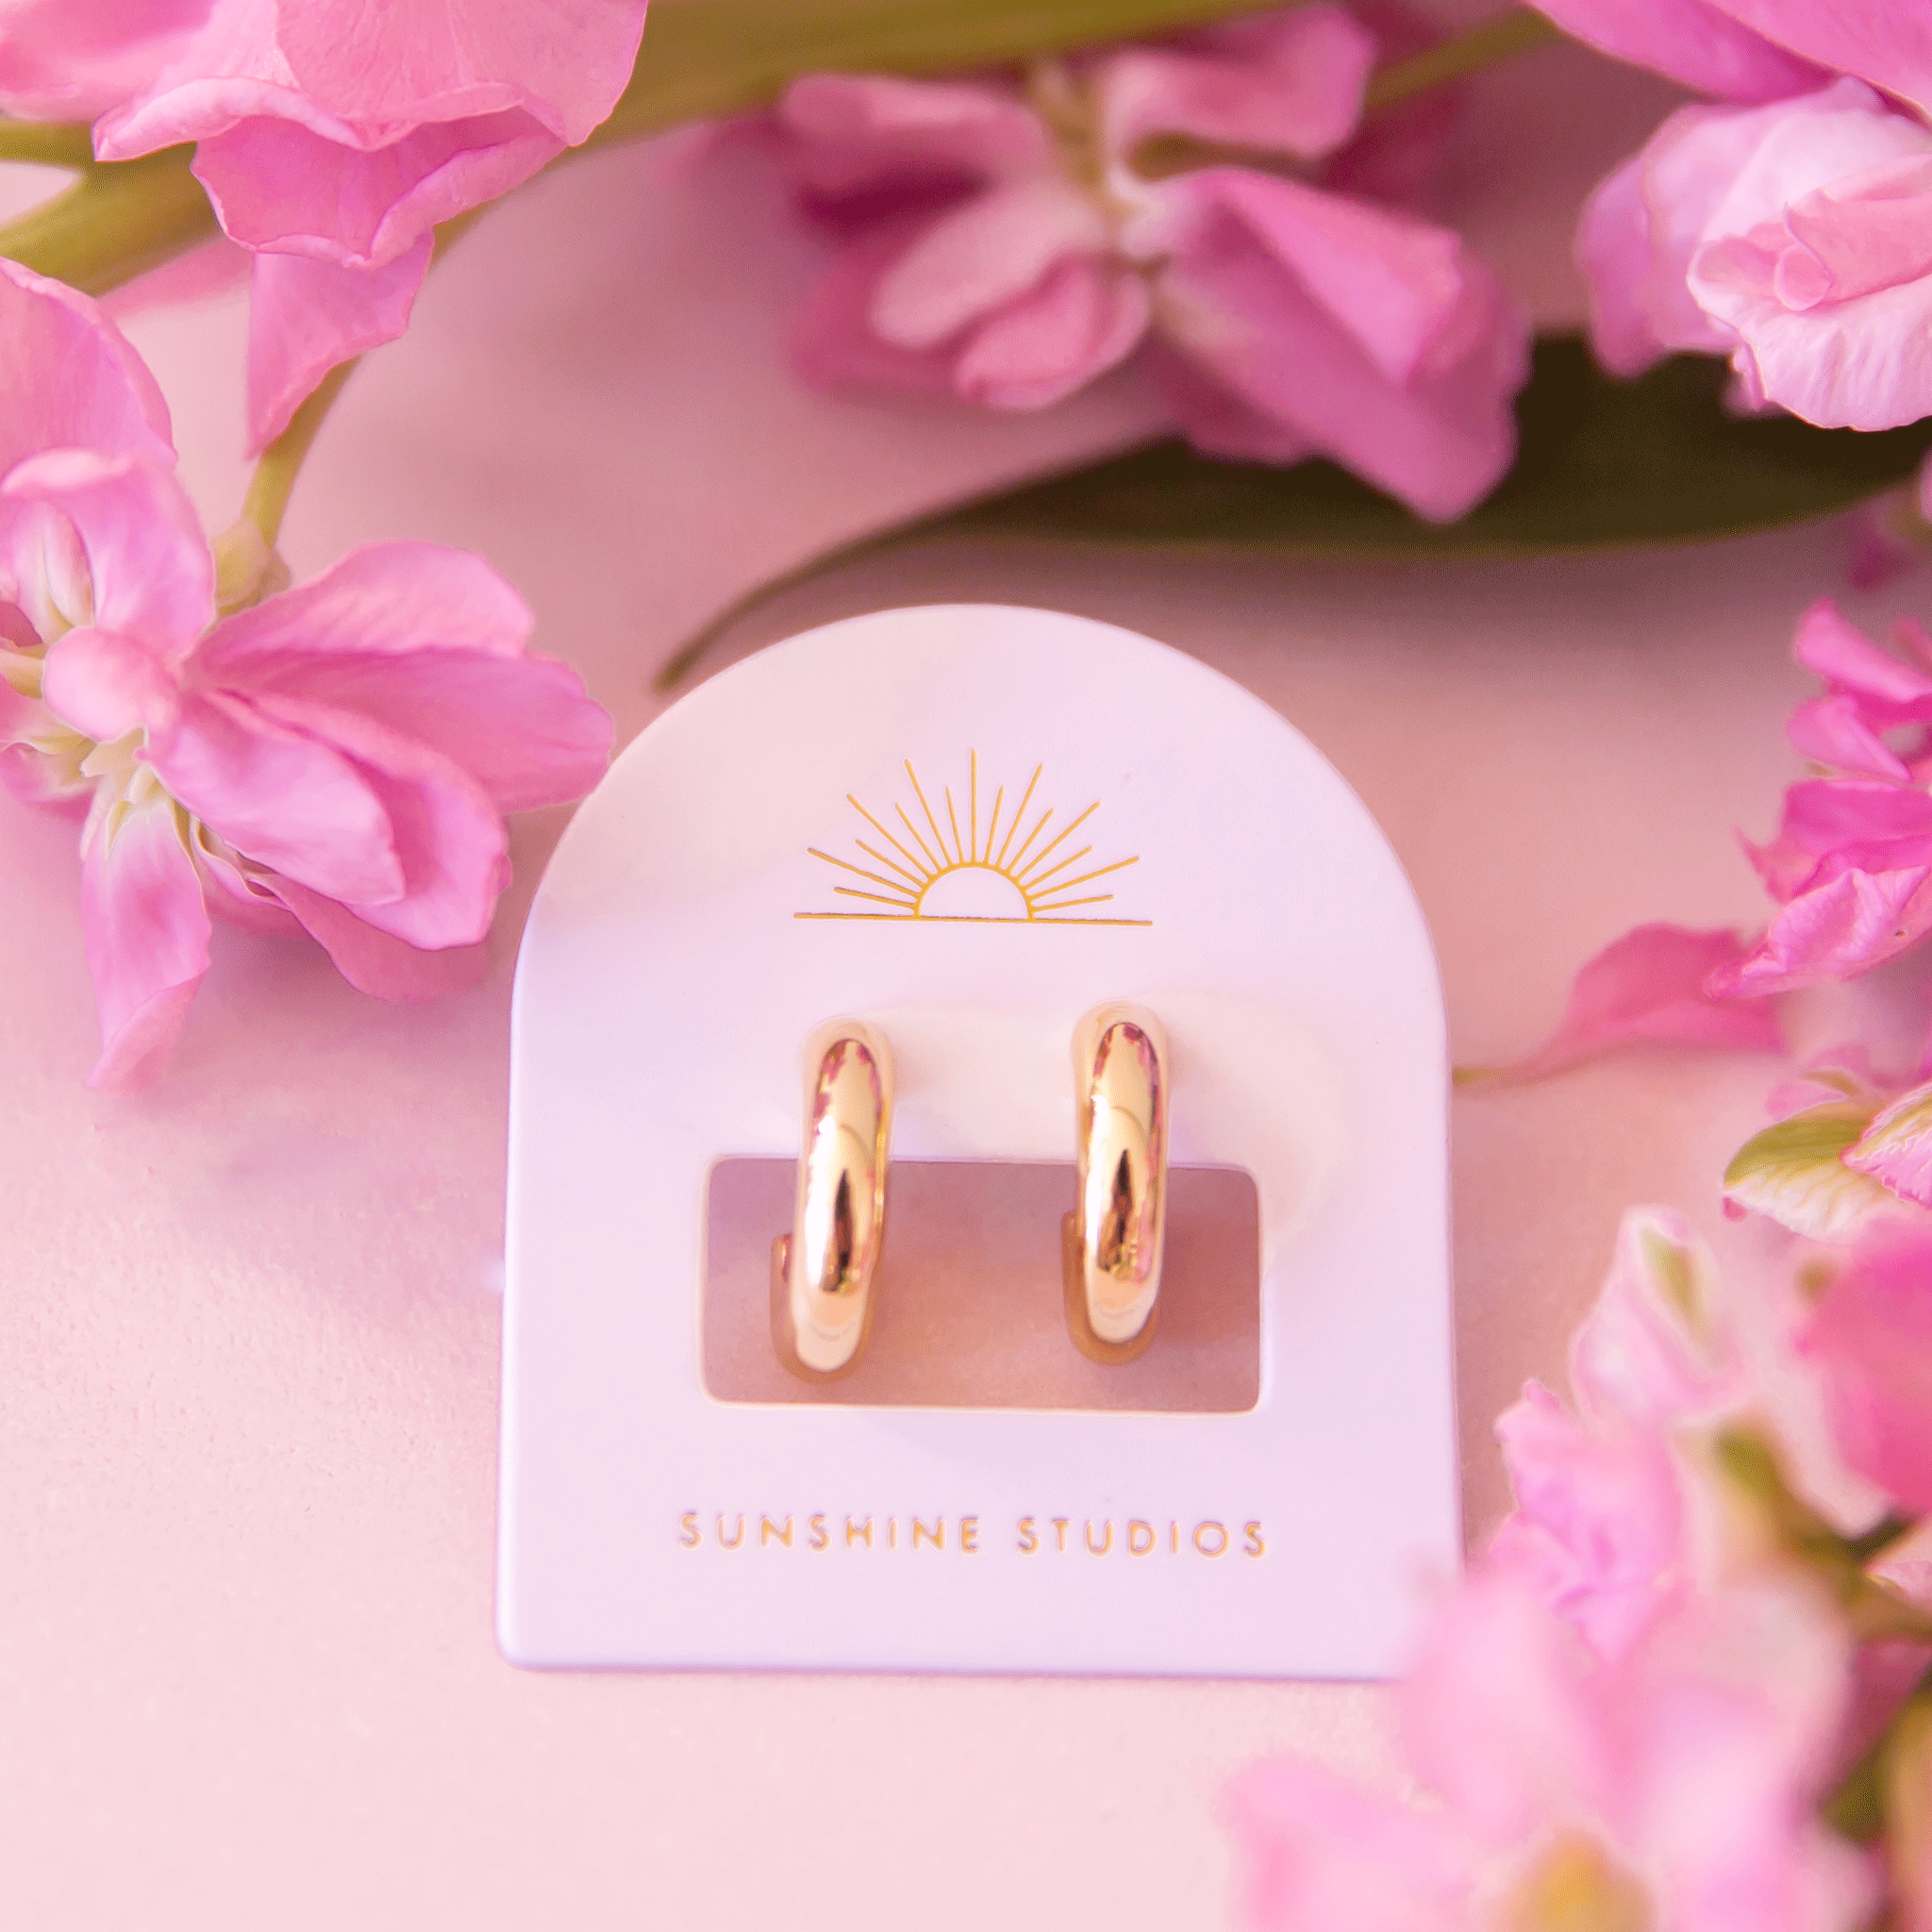 On a pink background is a pair of chunky gold hoop earrings on their arched packaging with a sun ray logo at the top and gold text at the bottom that reads, "Sunshine Studios".